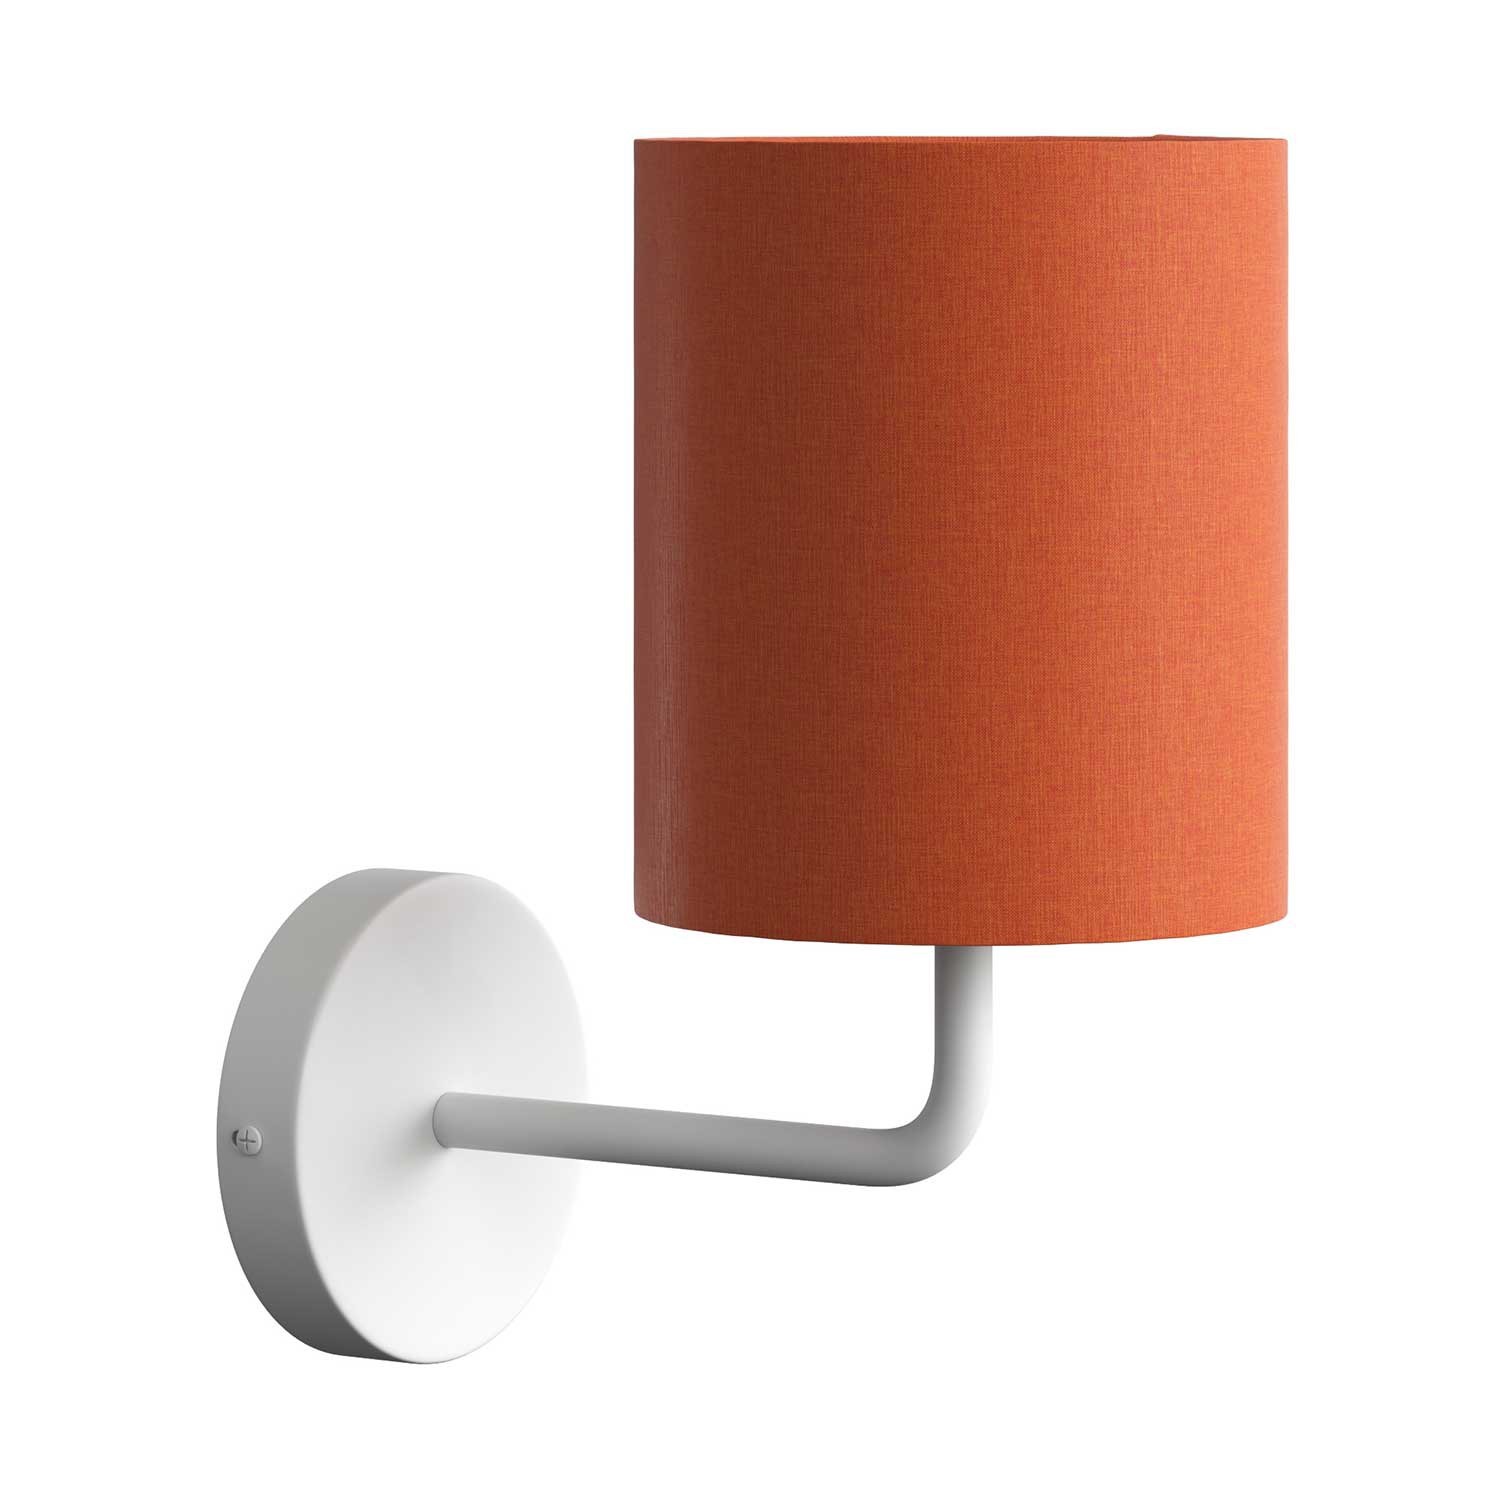 Fermaluce Metal metal wall light with lampshade and bent extension